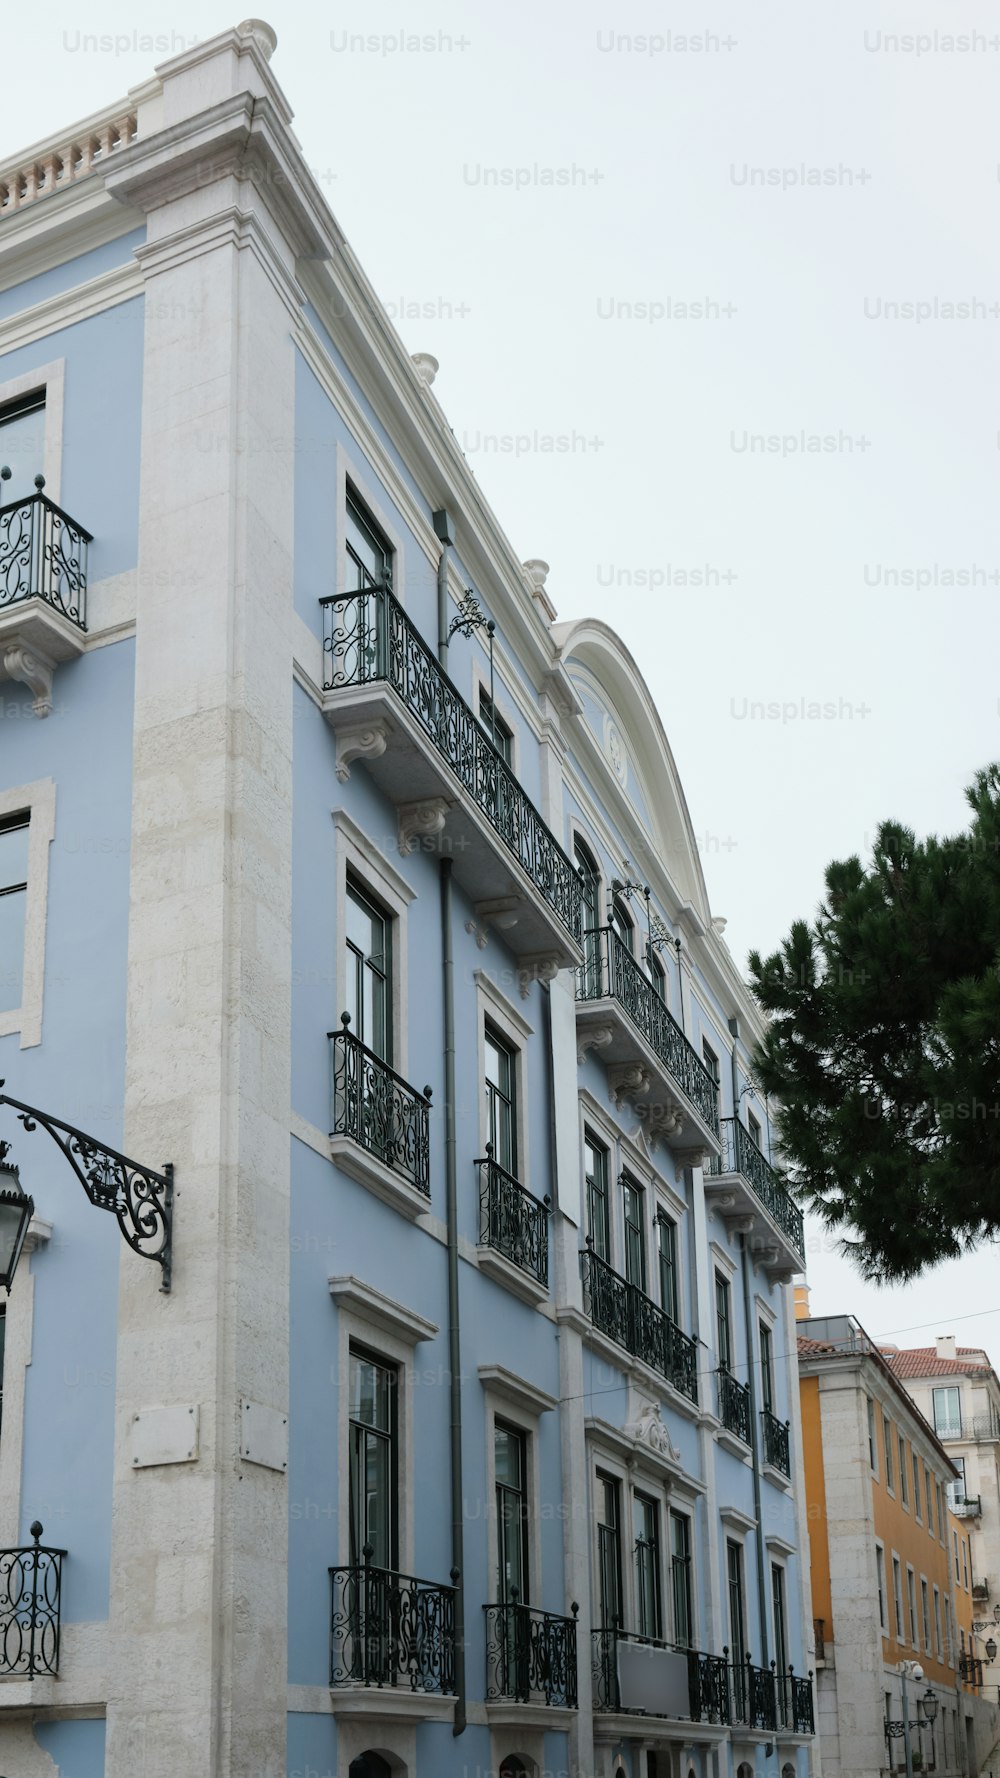 a blue and white building with balconies and wrought iron balconies